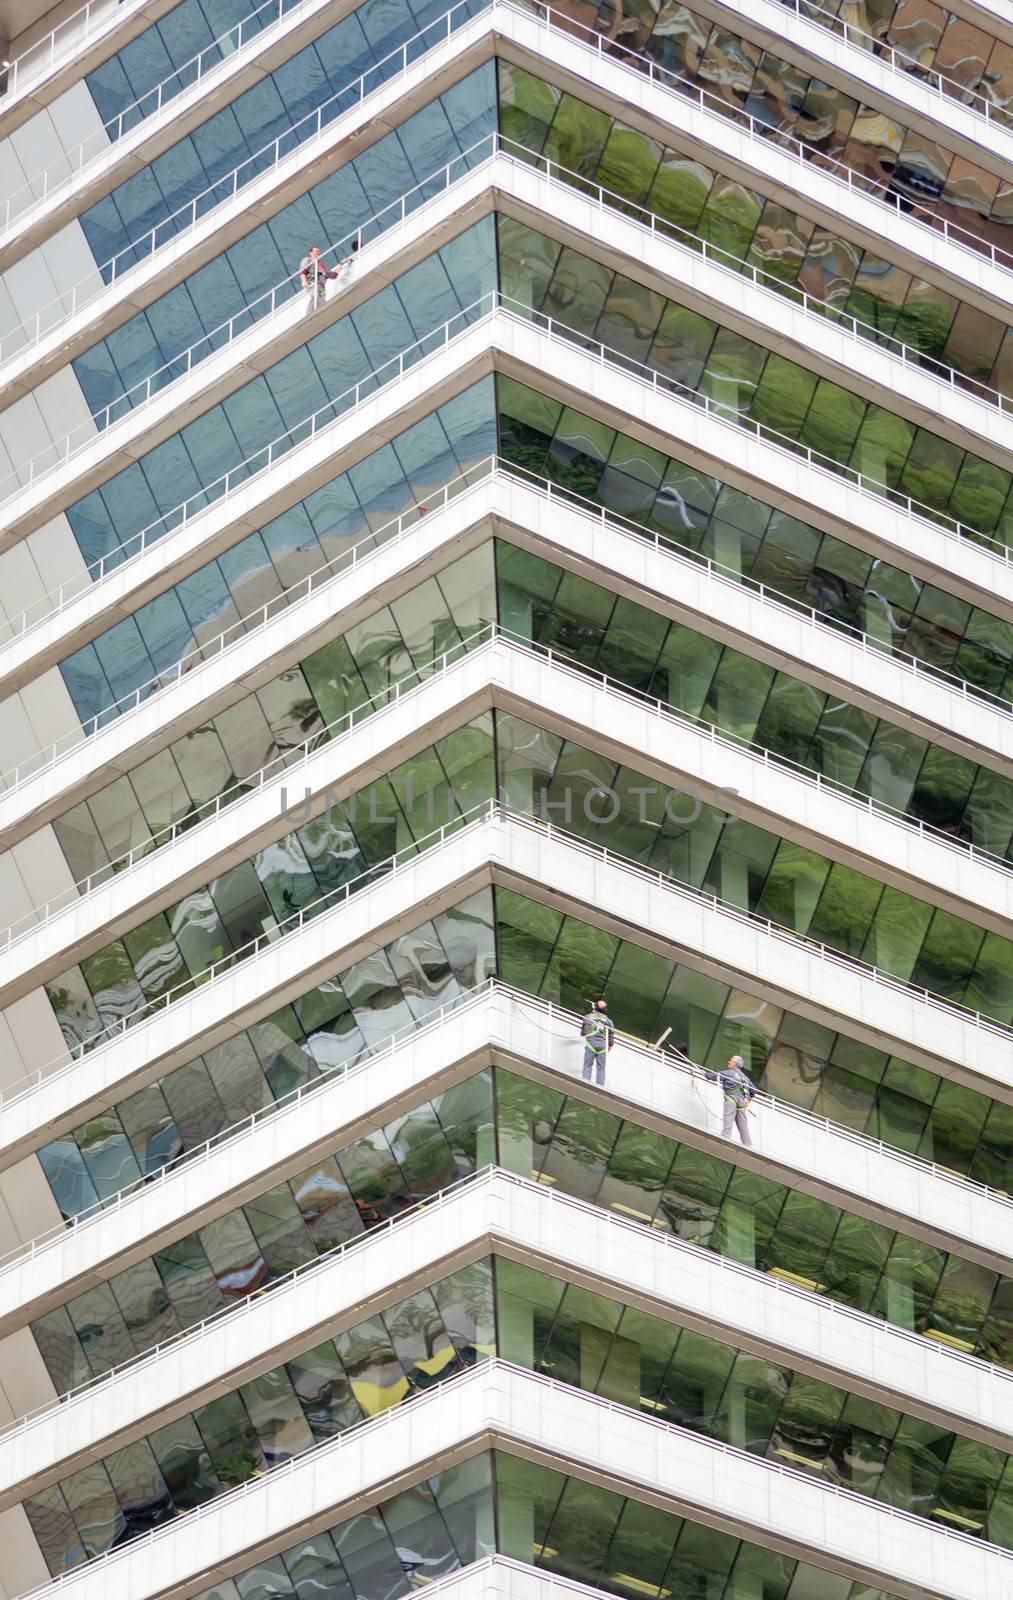 Workers cleaning windows on a skyscraper by doble.d